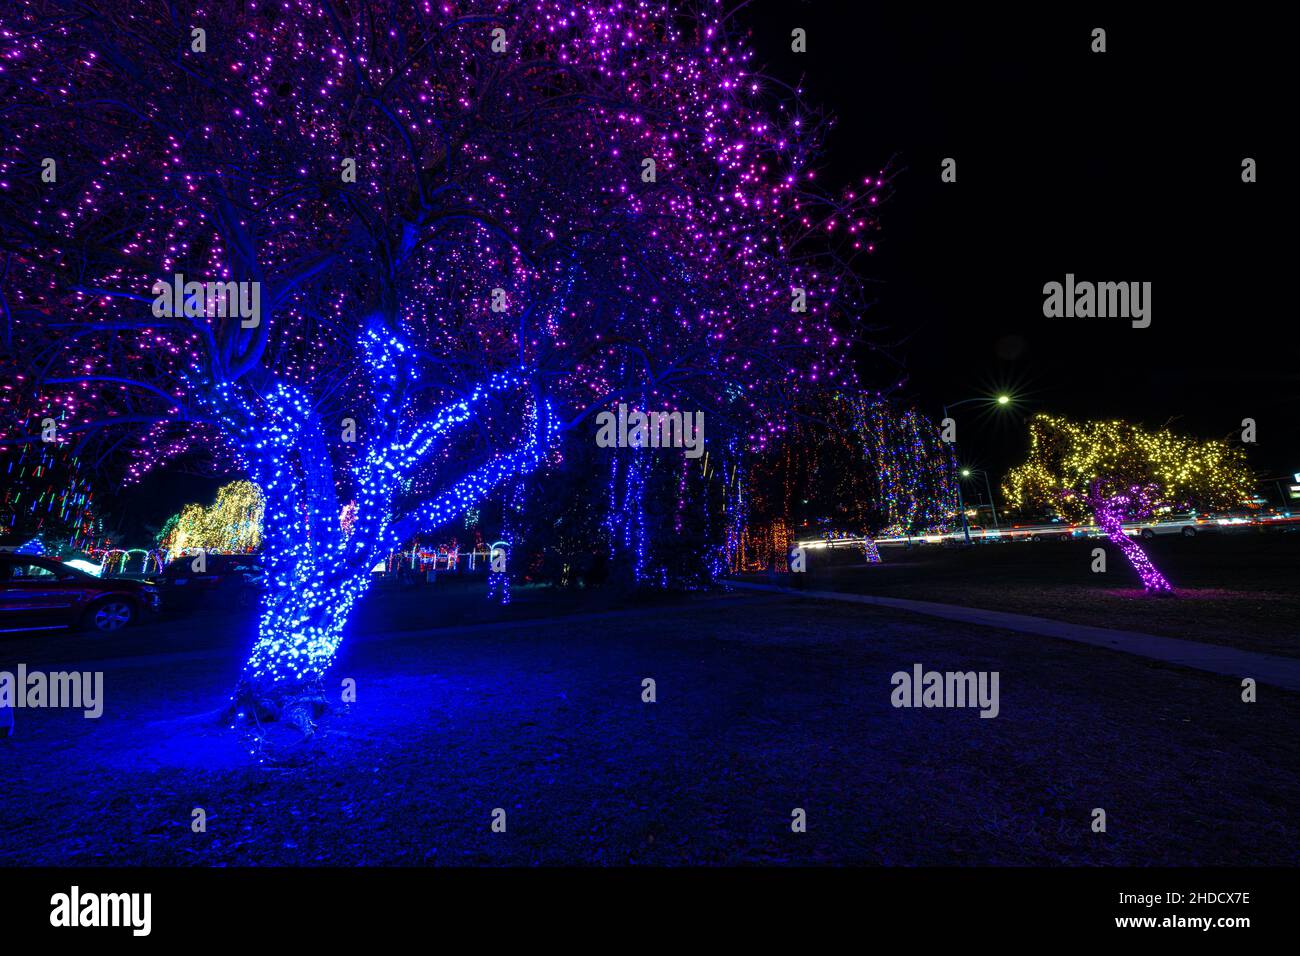 Colorful Christmas Illumination in December Stock Photo